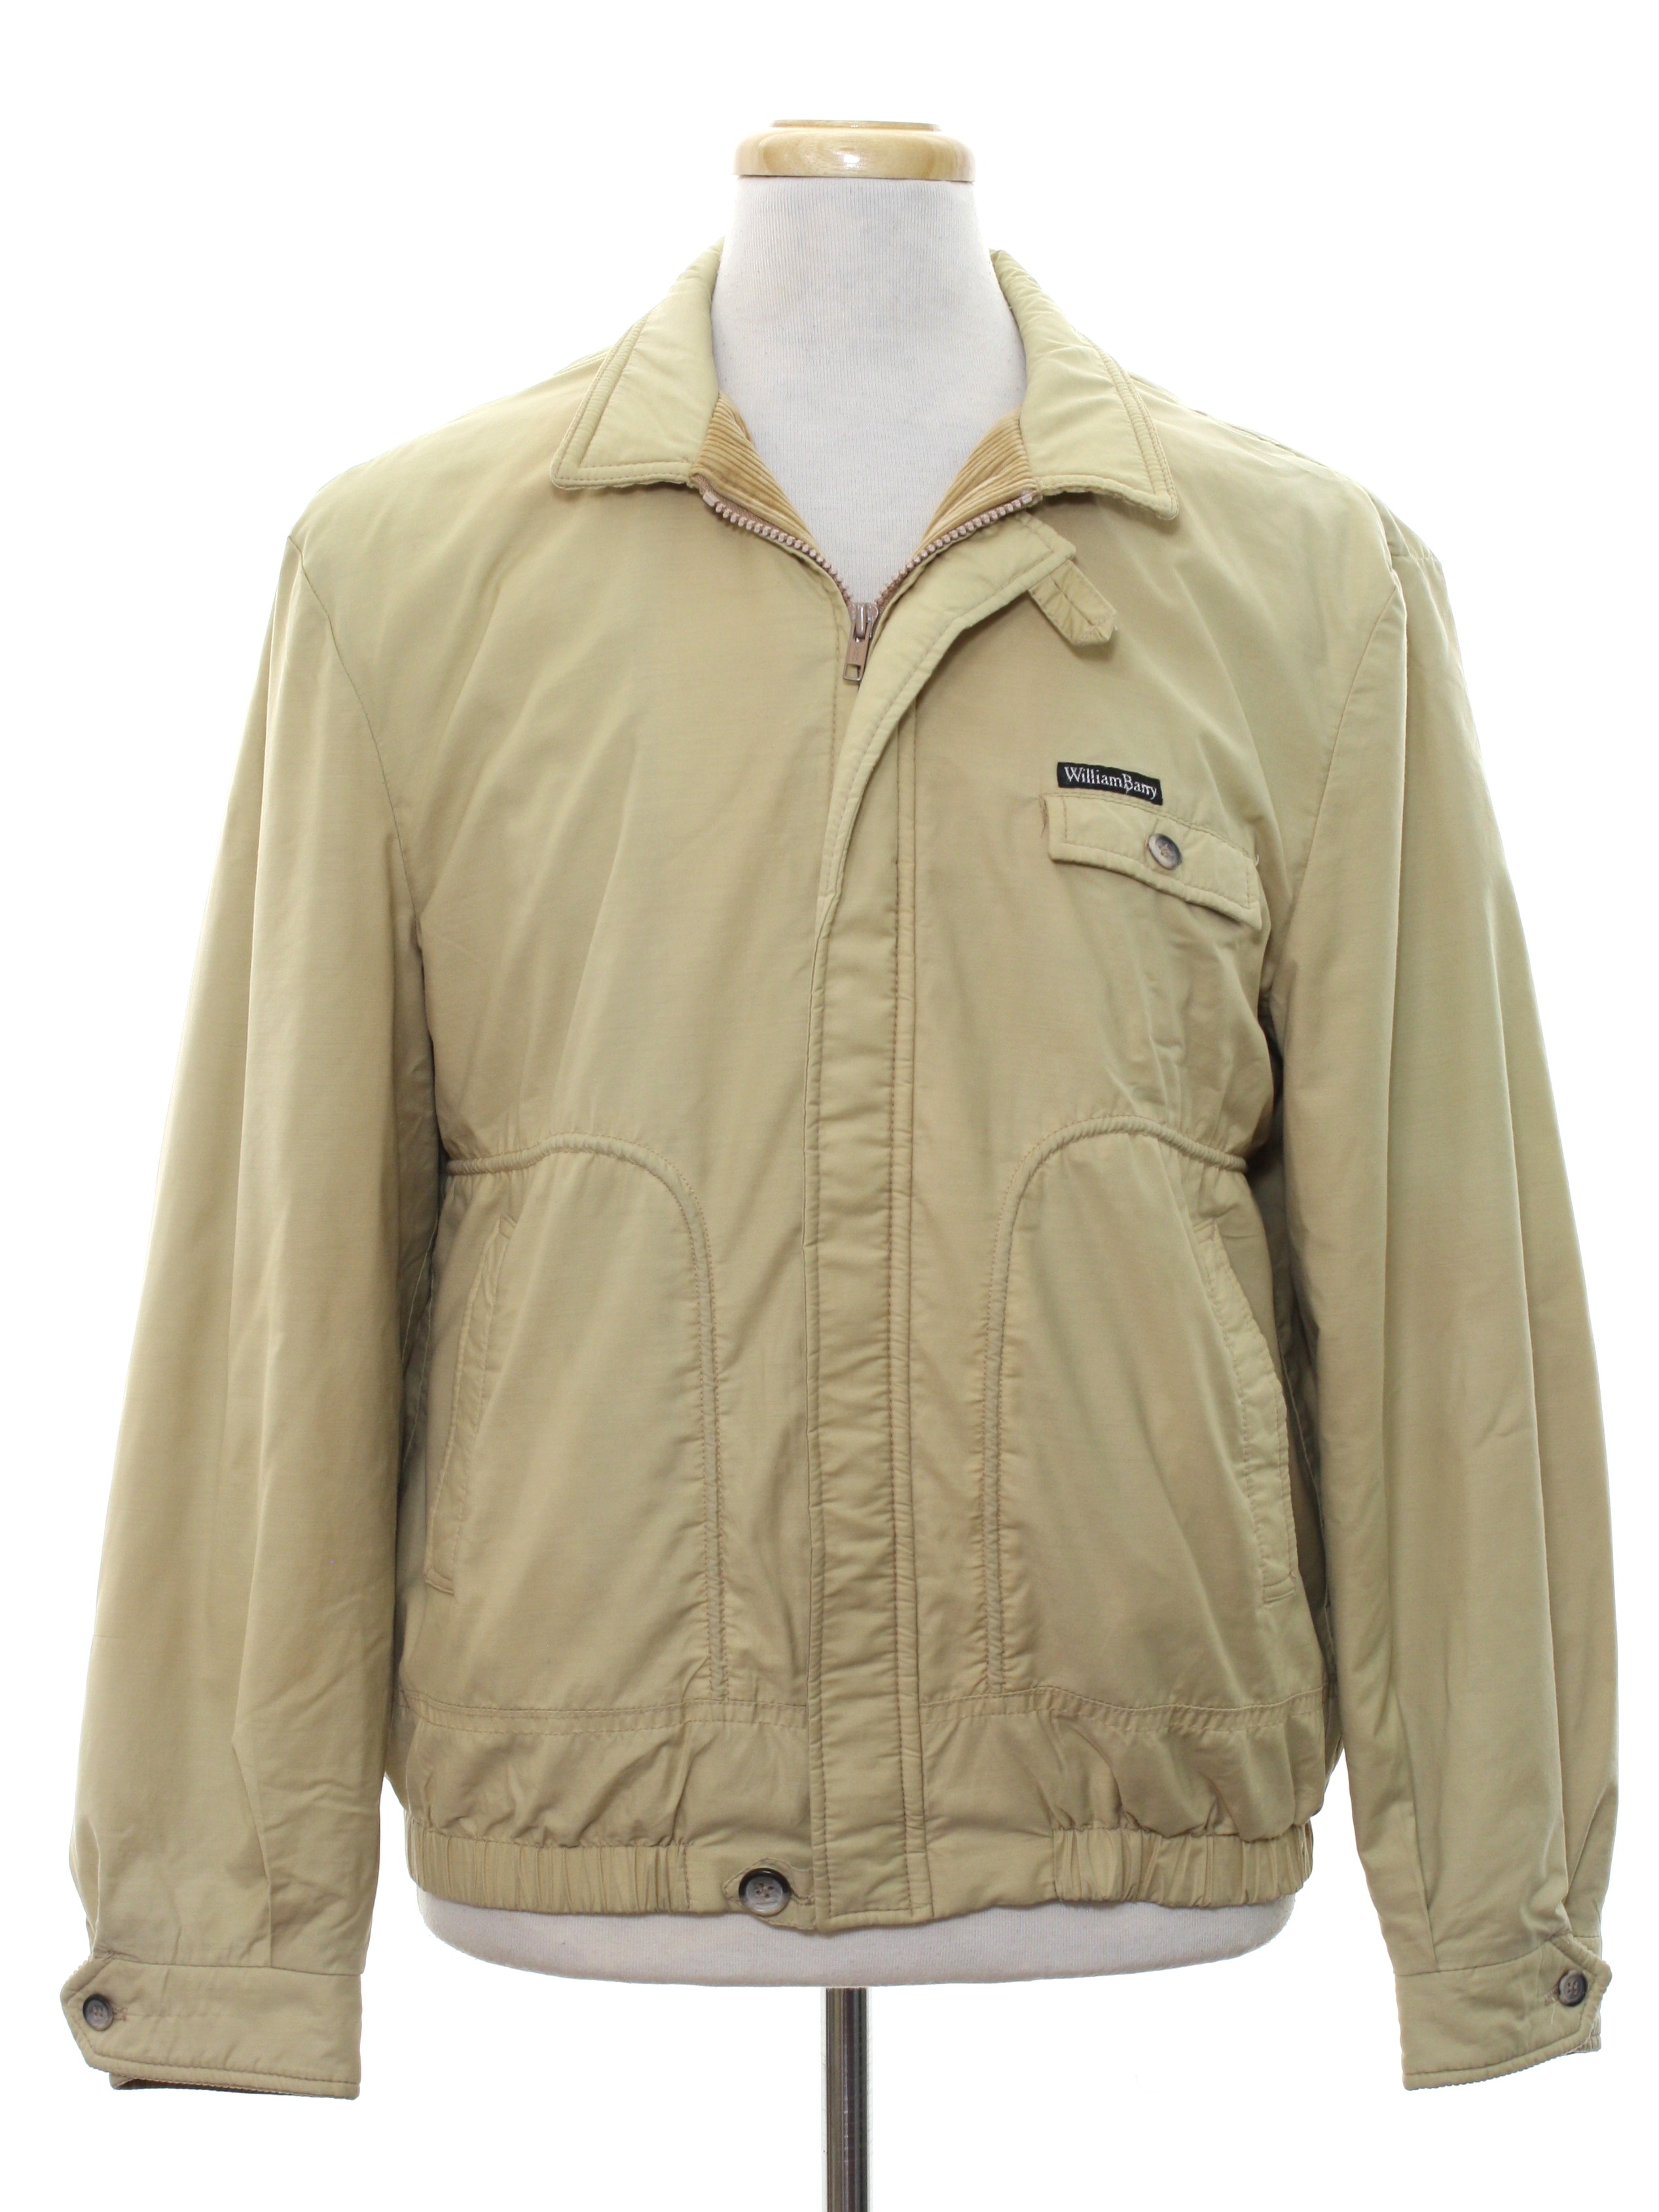 1980's Retro Jacket: Early 80s -William Barry- Mens light tan polyester ...